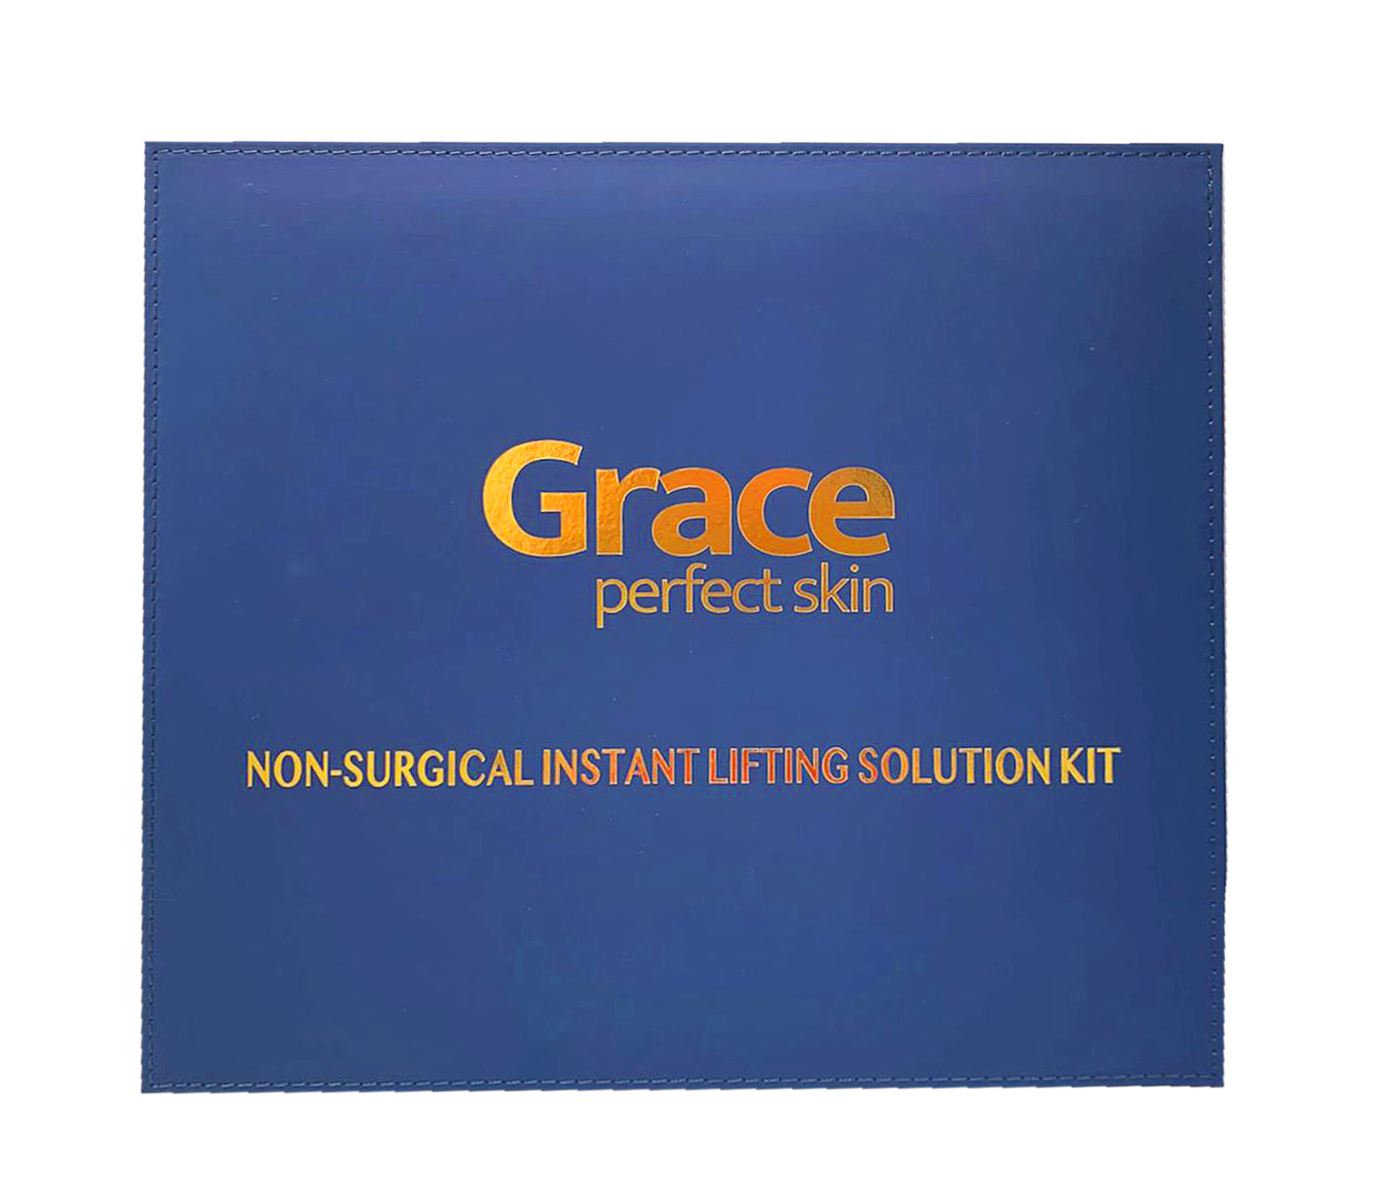 Non-Surgical instant Lifting Solution Kit – Grace Perfect Skin